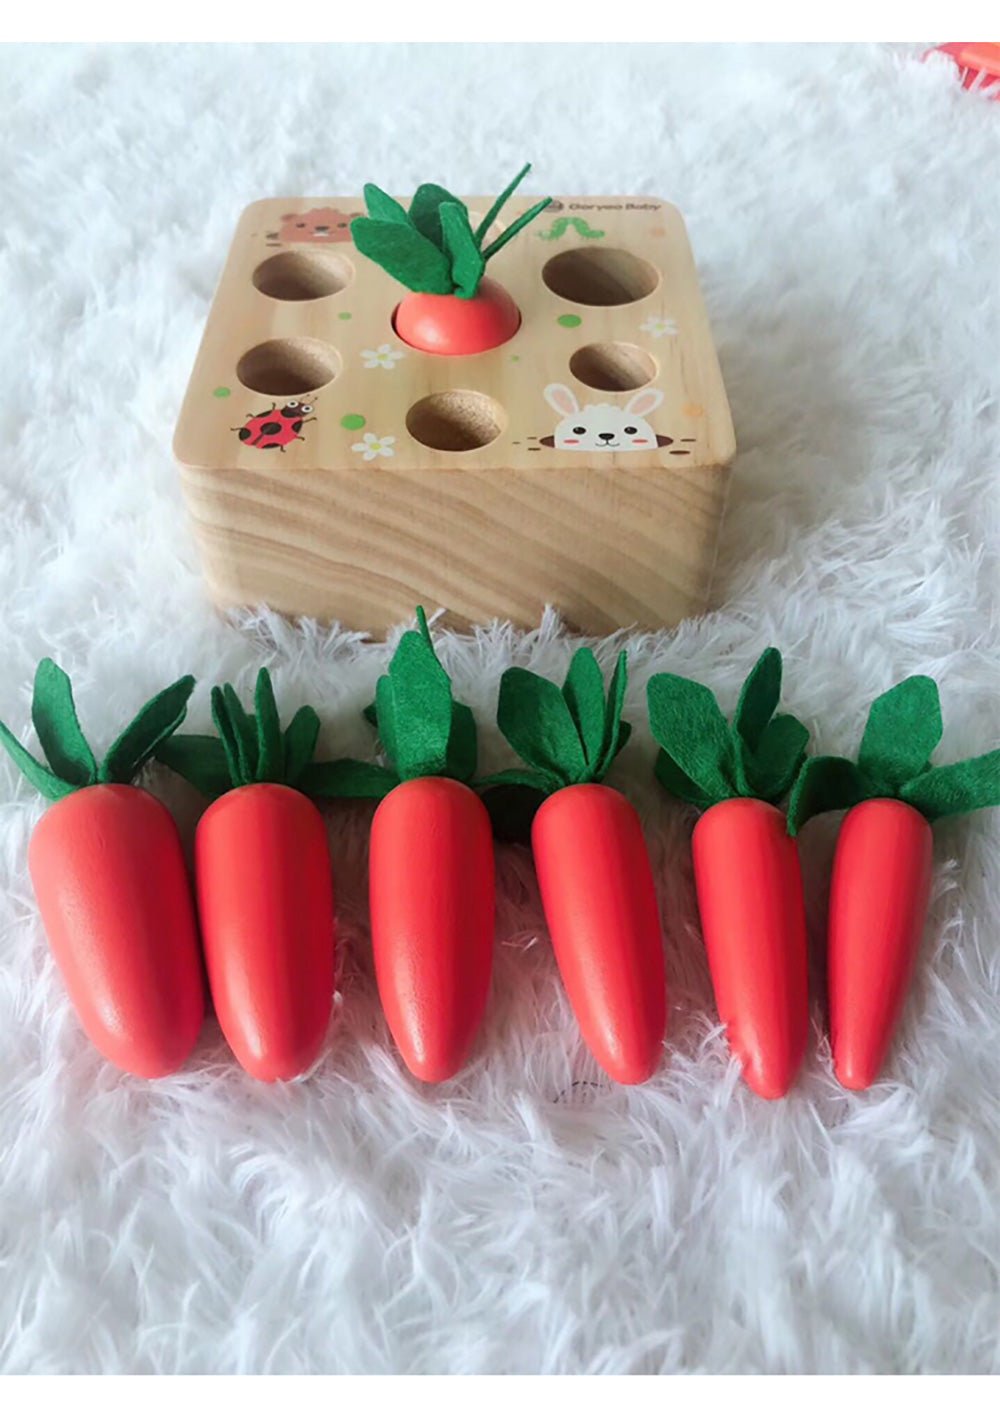 Montessori Toys for Toddler - Carrot Harvest Wooden Matching Puzzle, Shape & Size Sorting Games for Developing Fine Motor Skill, Educational Gift for Baby Boys Girls, Made of Natural Pine Wood - Whizmeal : Inspire a healthy you